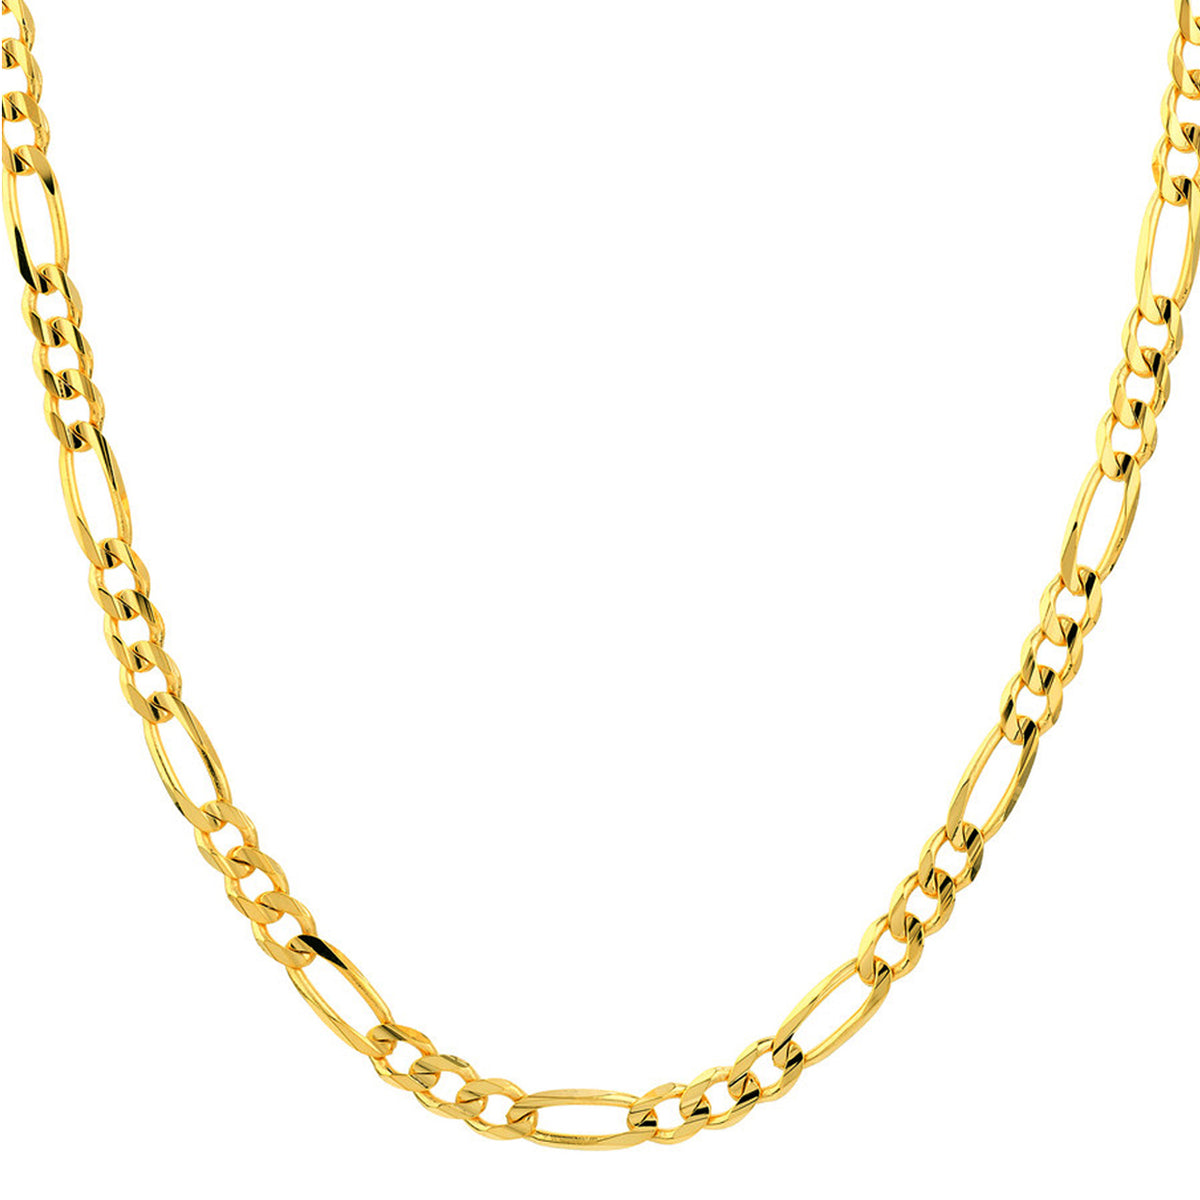 14k Yellow Gold Hollow 9.5mm Figaro Chain Necklace with Lobster Lock